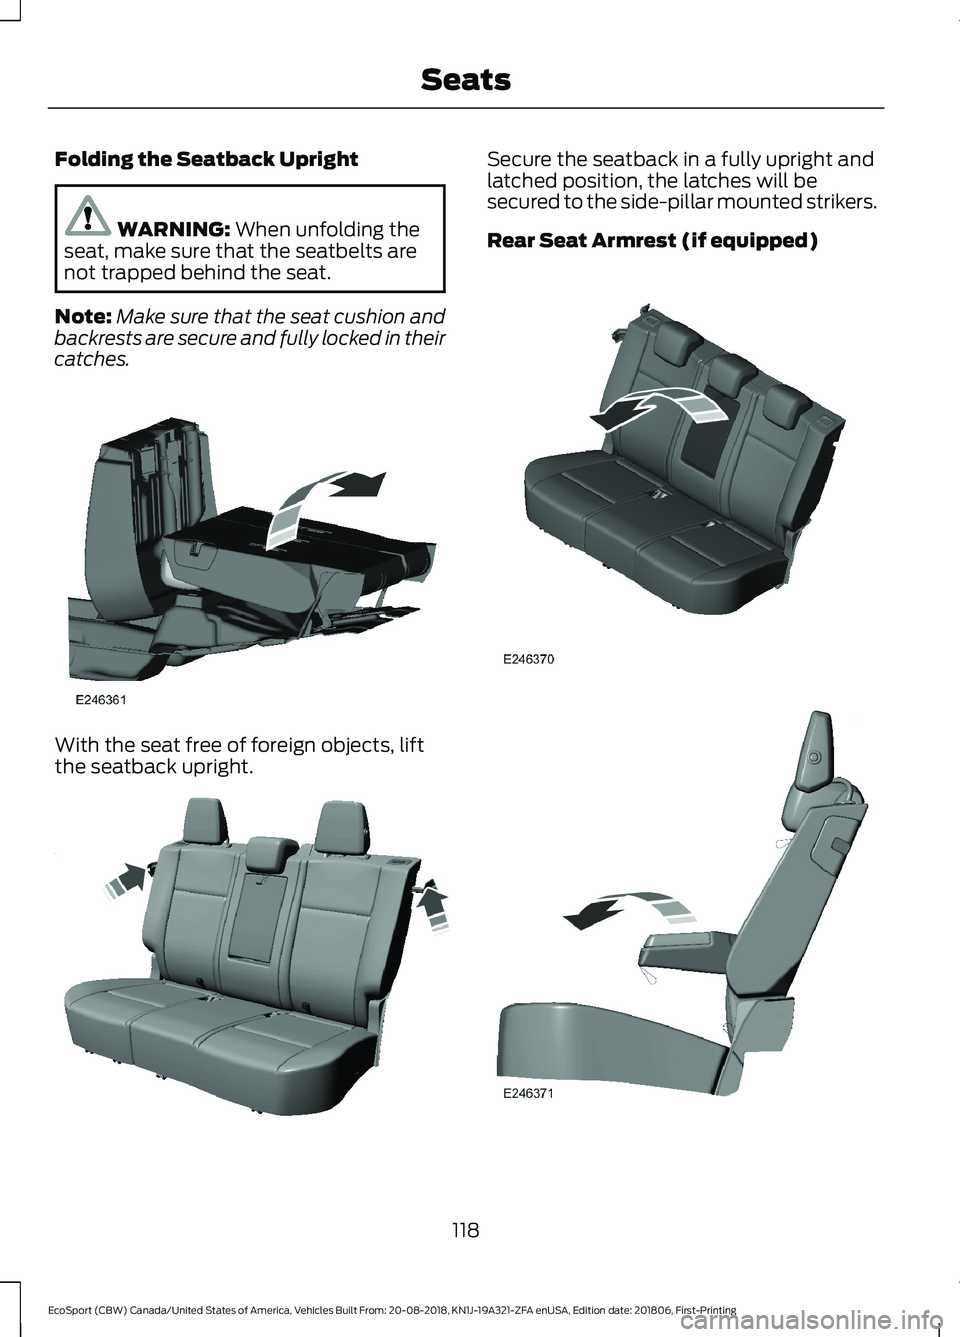 FORD ECOSPORT 2019  Owners Manual Folding the Seatback Upright
WARNING: When unfolding theseat, make sure that the seatbelts arenot trapped behind the seat.
Note:Make sure that the seat cushion andbackrests are secure and fully locked